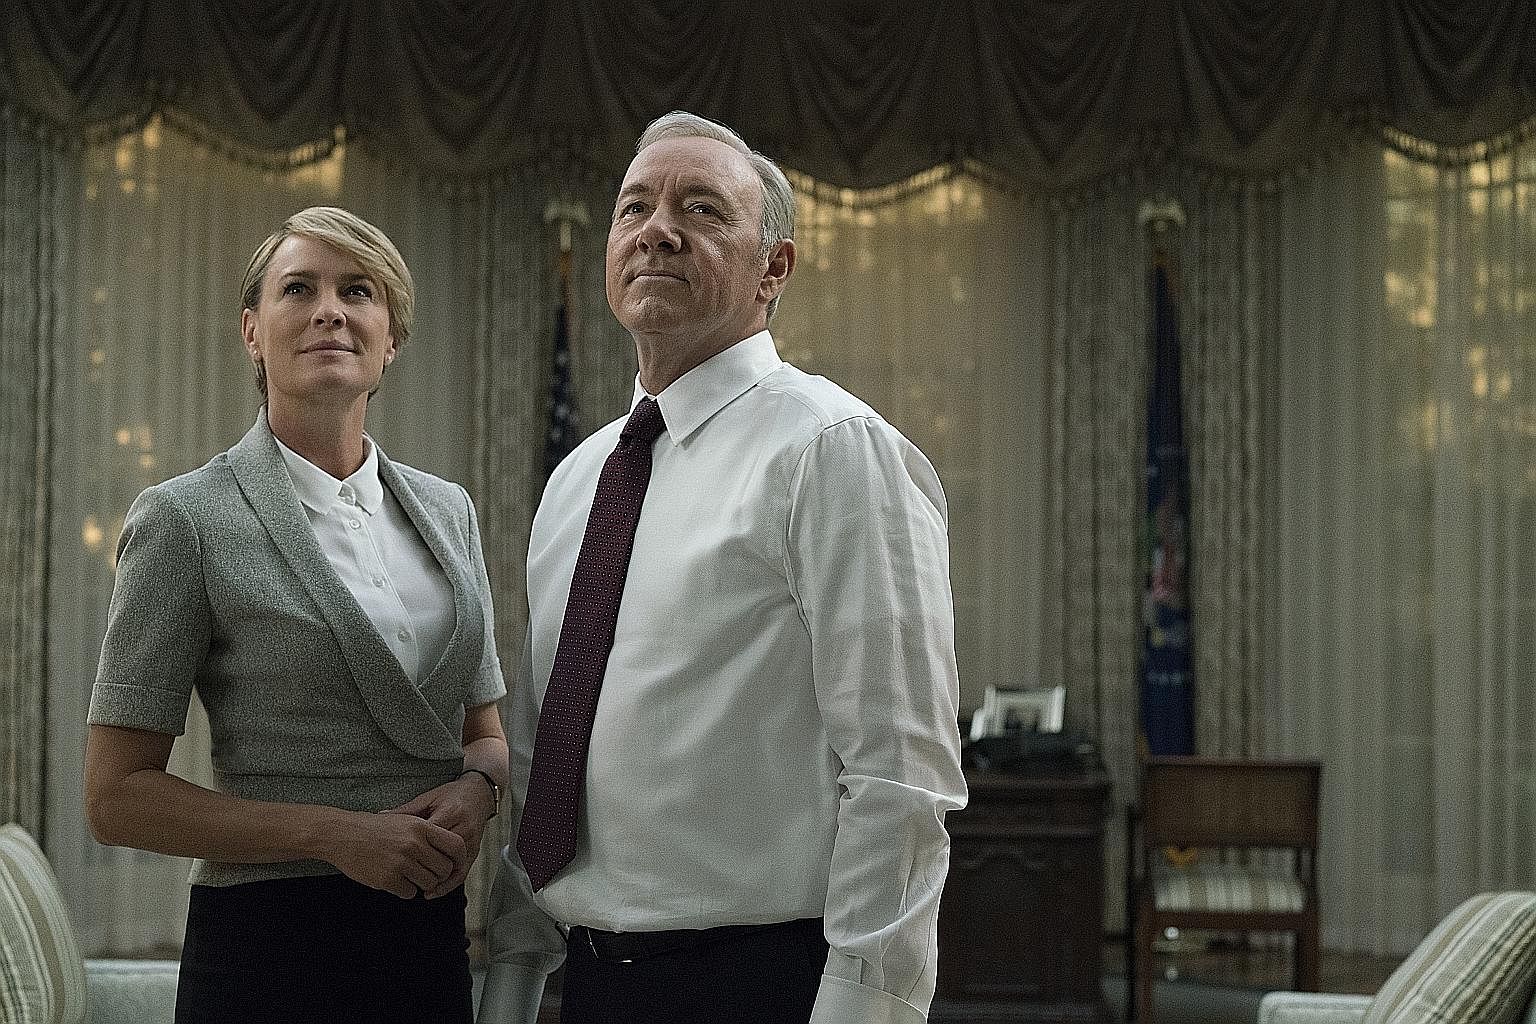 In 2013, Netflix became a content producer with the TV series House Of Cards, starring Kevin Spacey and Robin Wright. It has released more than 120 original series and films up to last September.